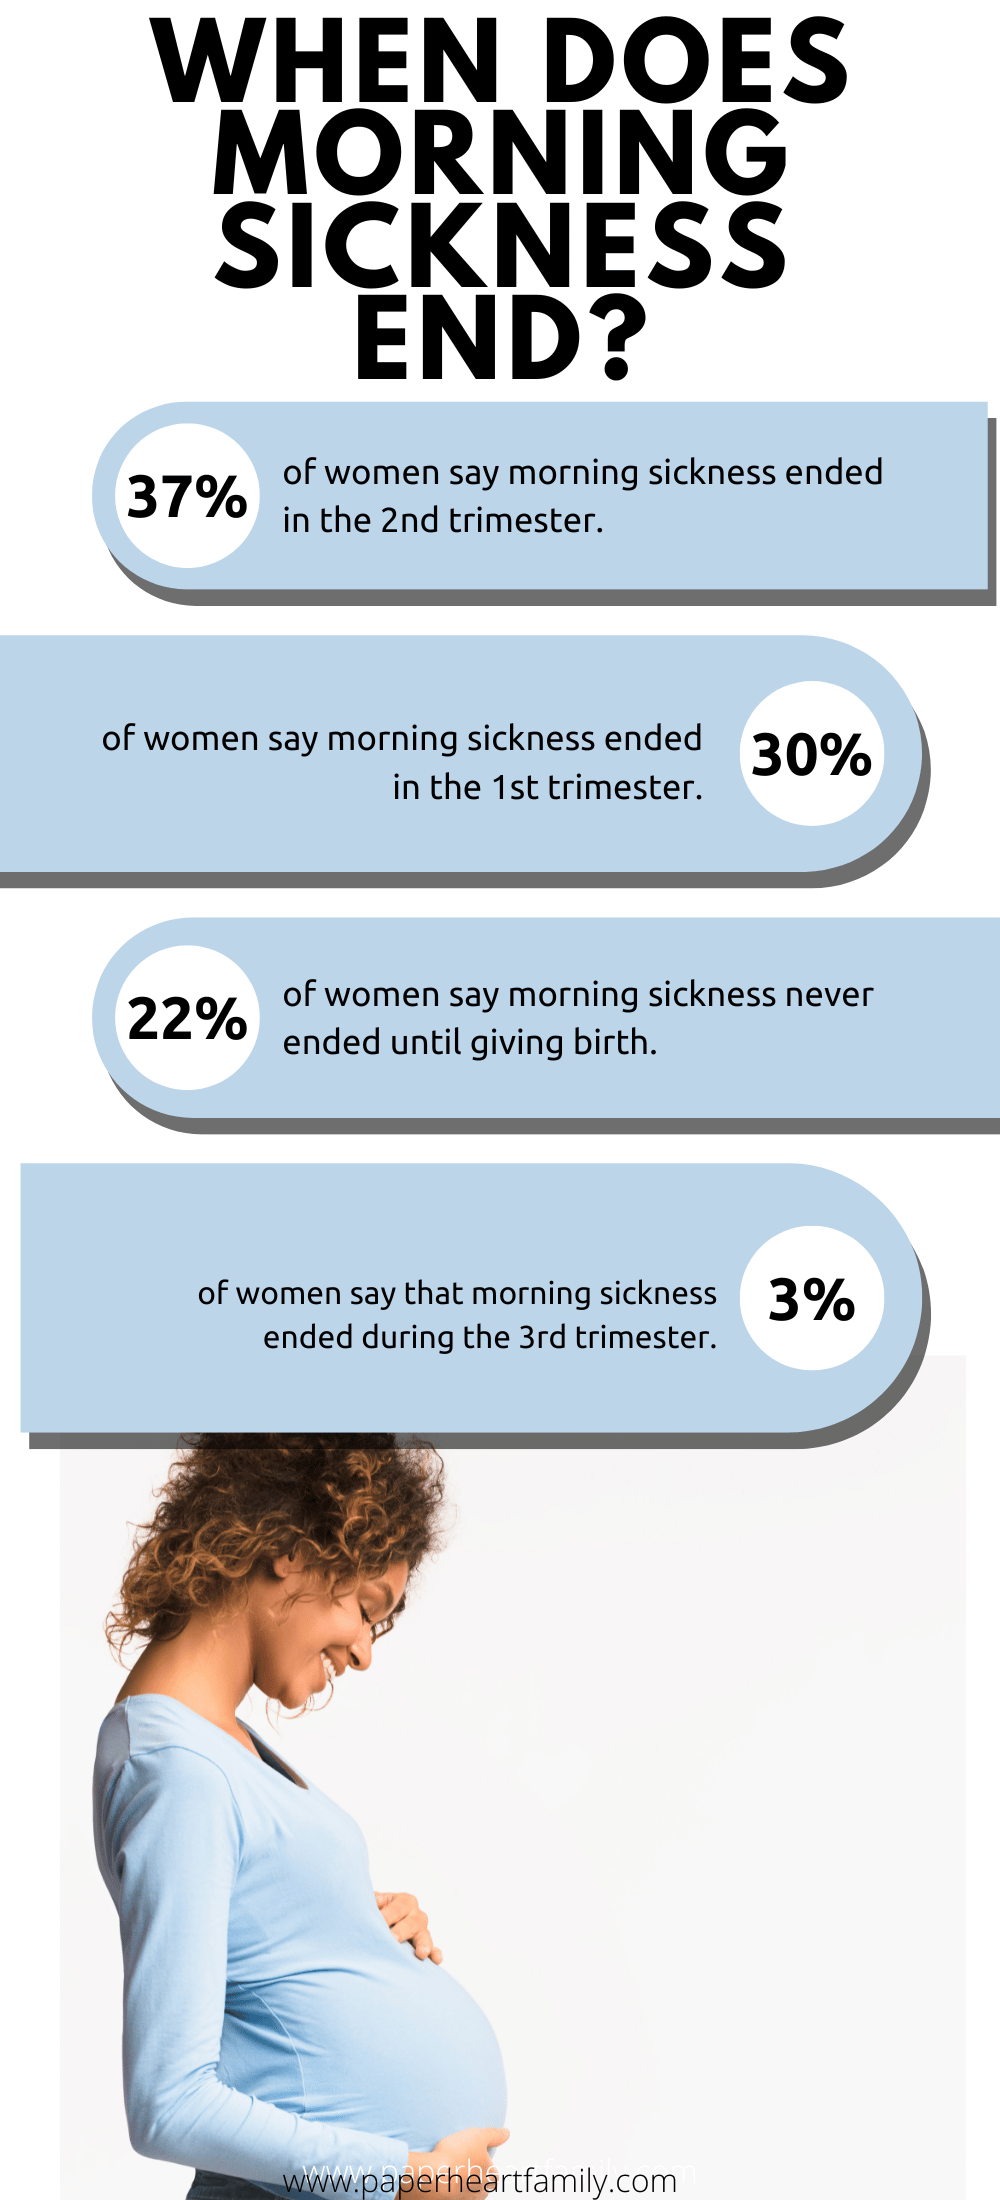 When Does Morning Sickness End Infographic